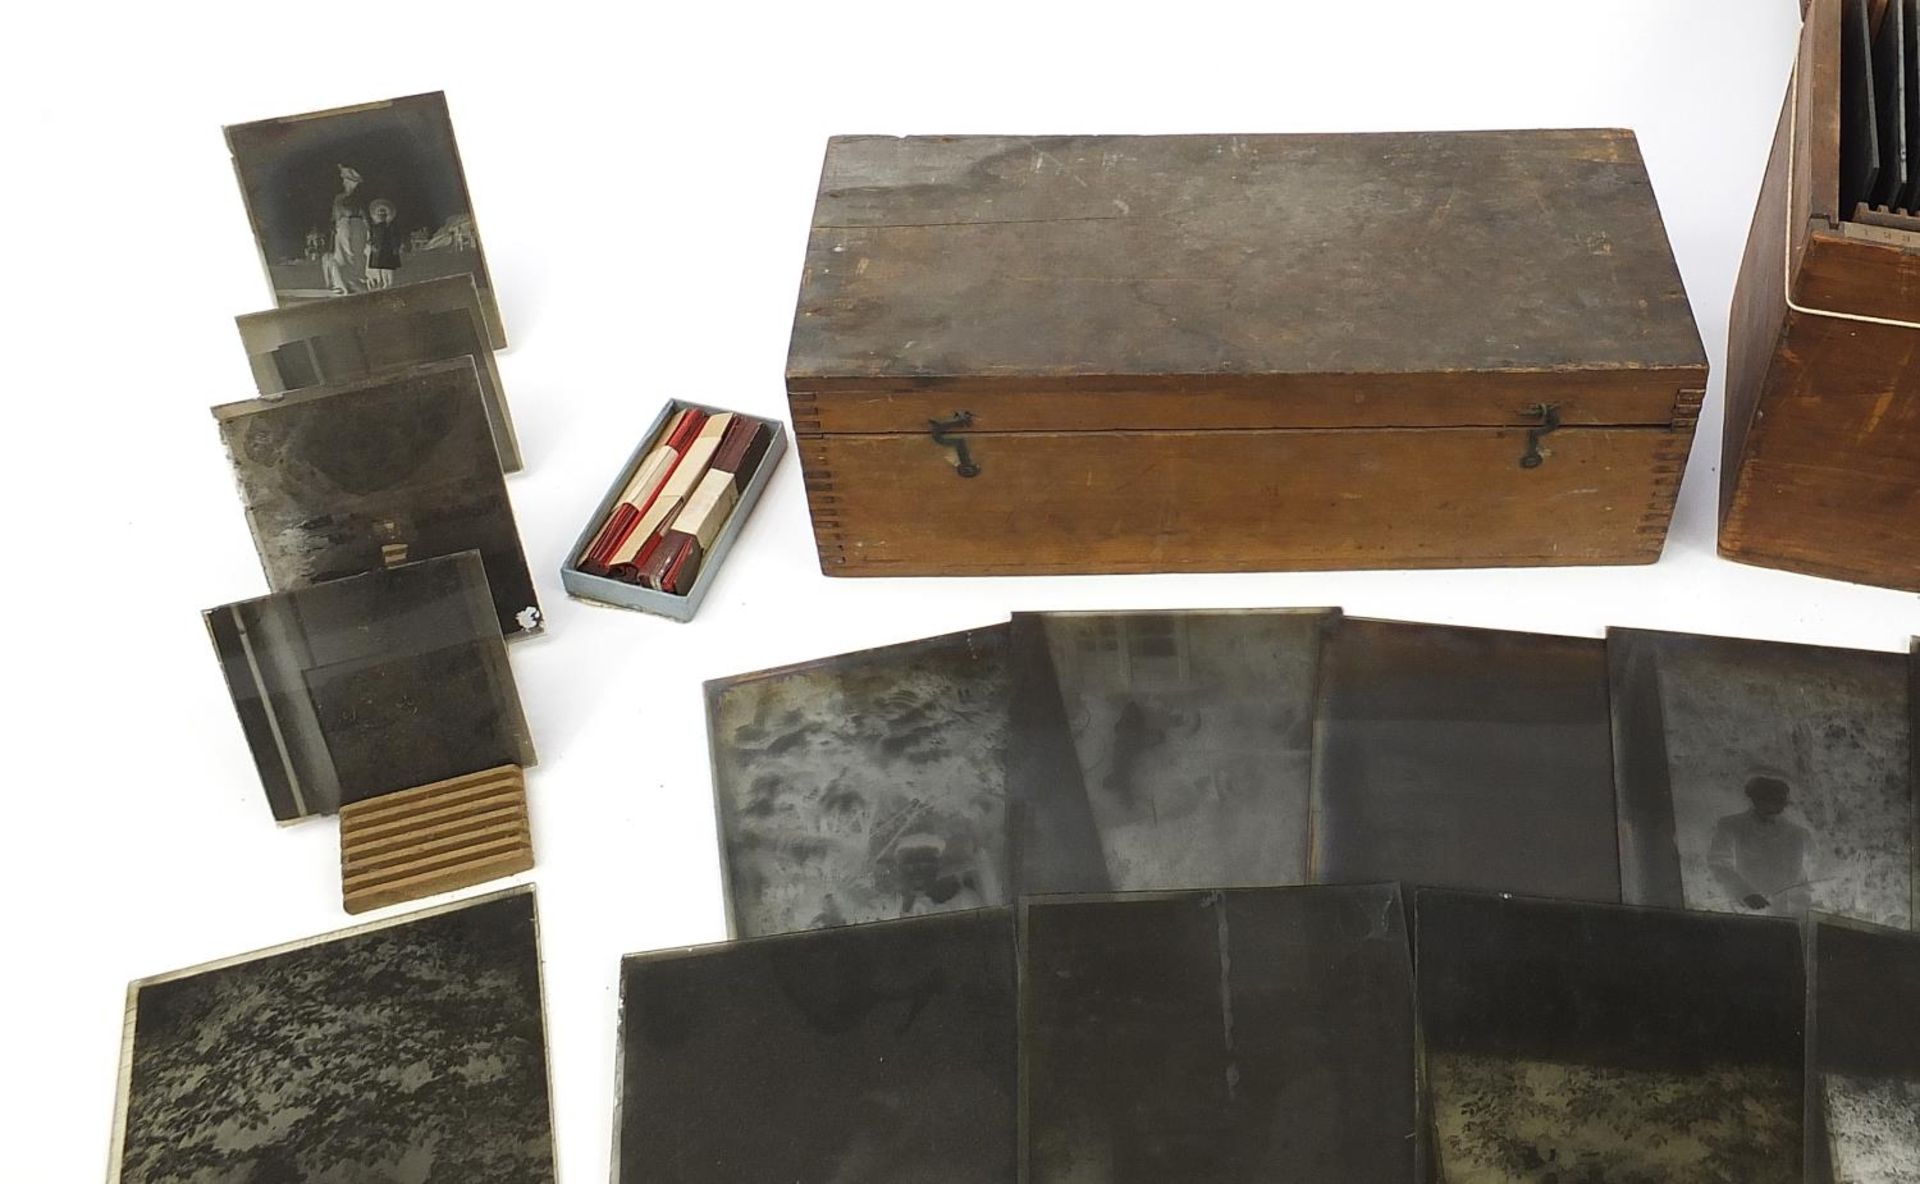 Collection of 19th century social history black and white glass slides arranged in two cases - Image 2 of 12